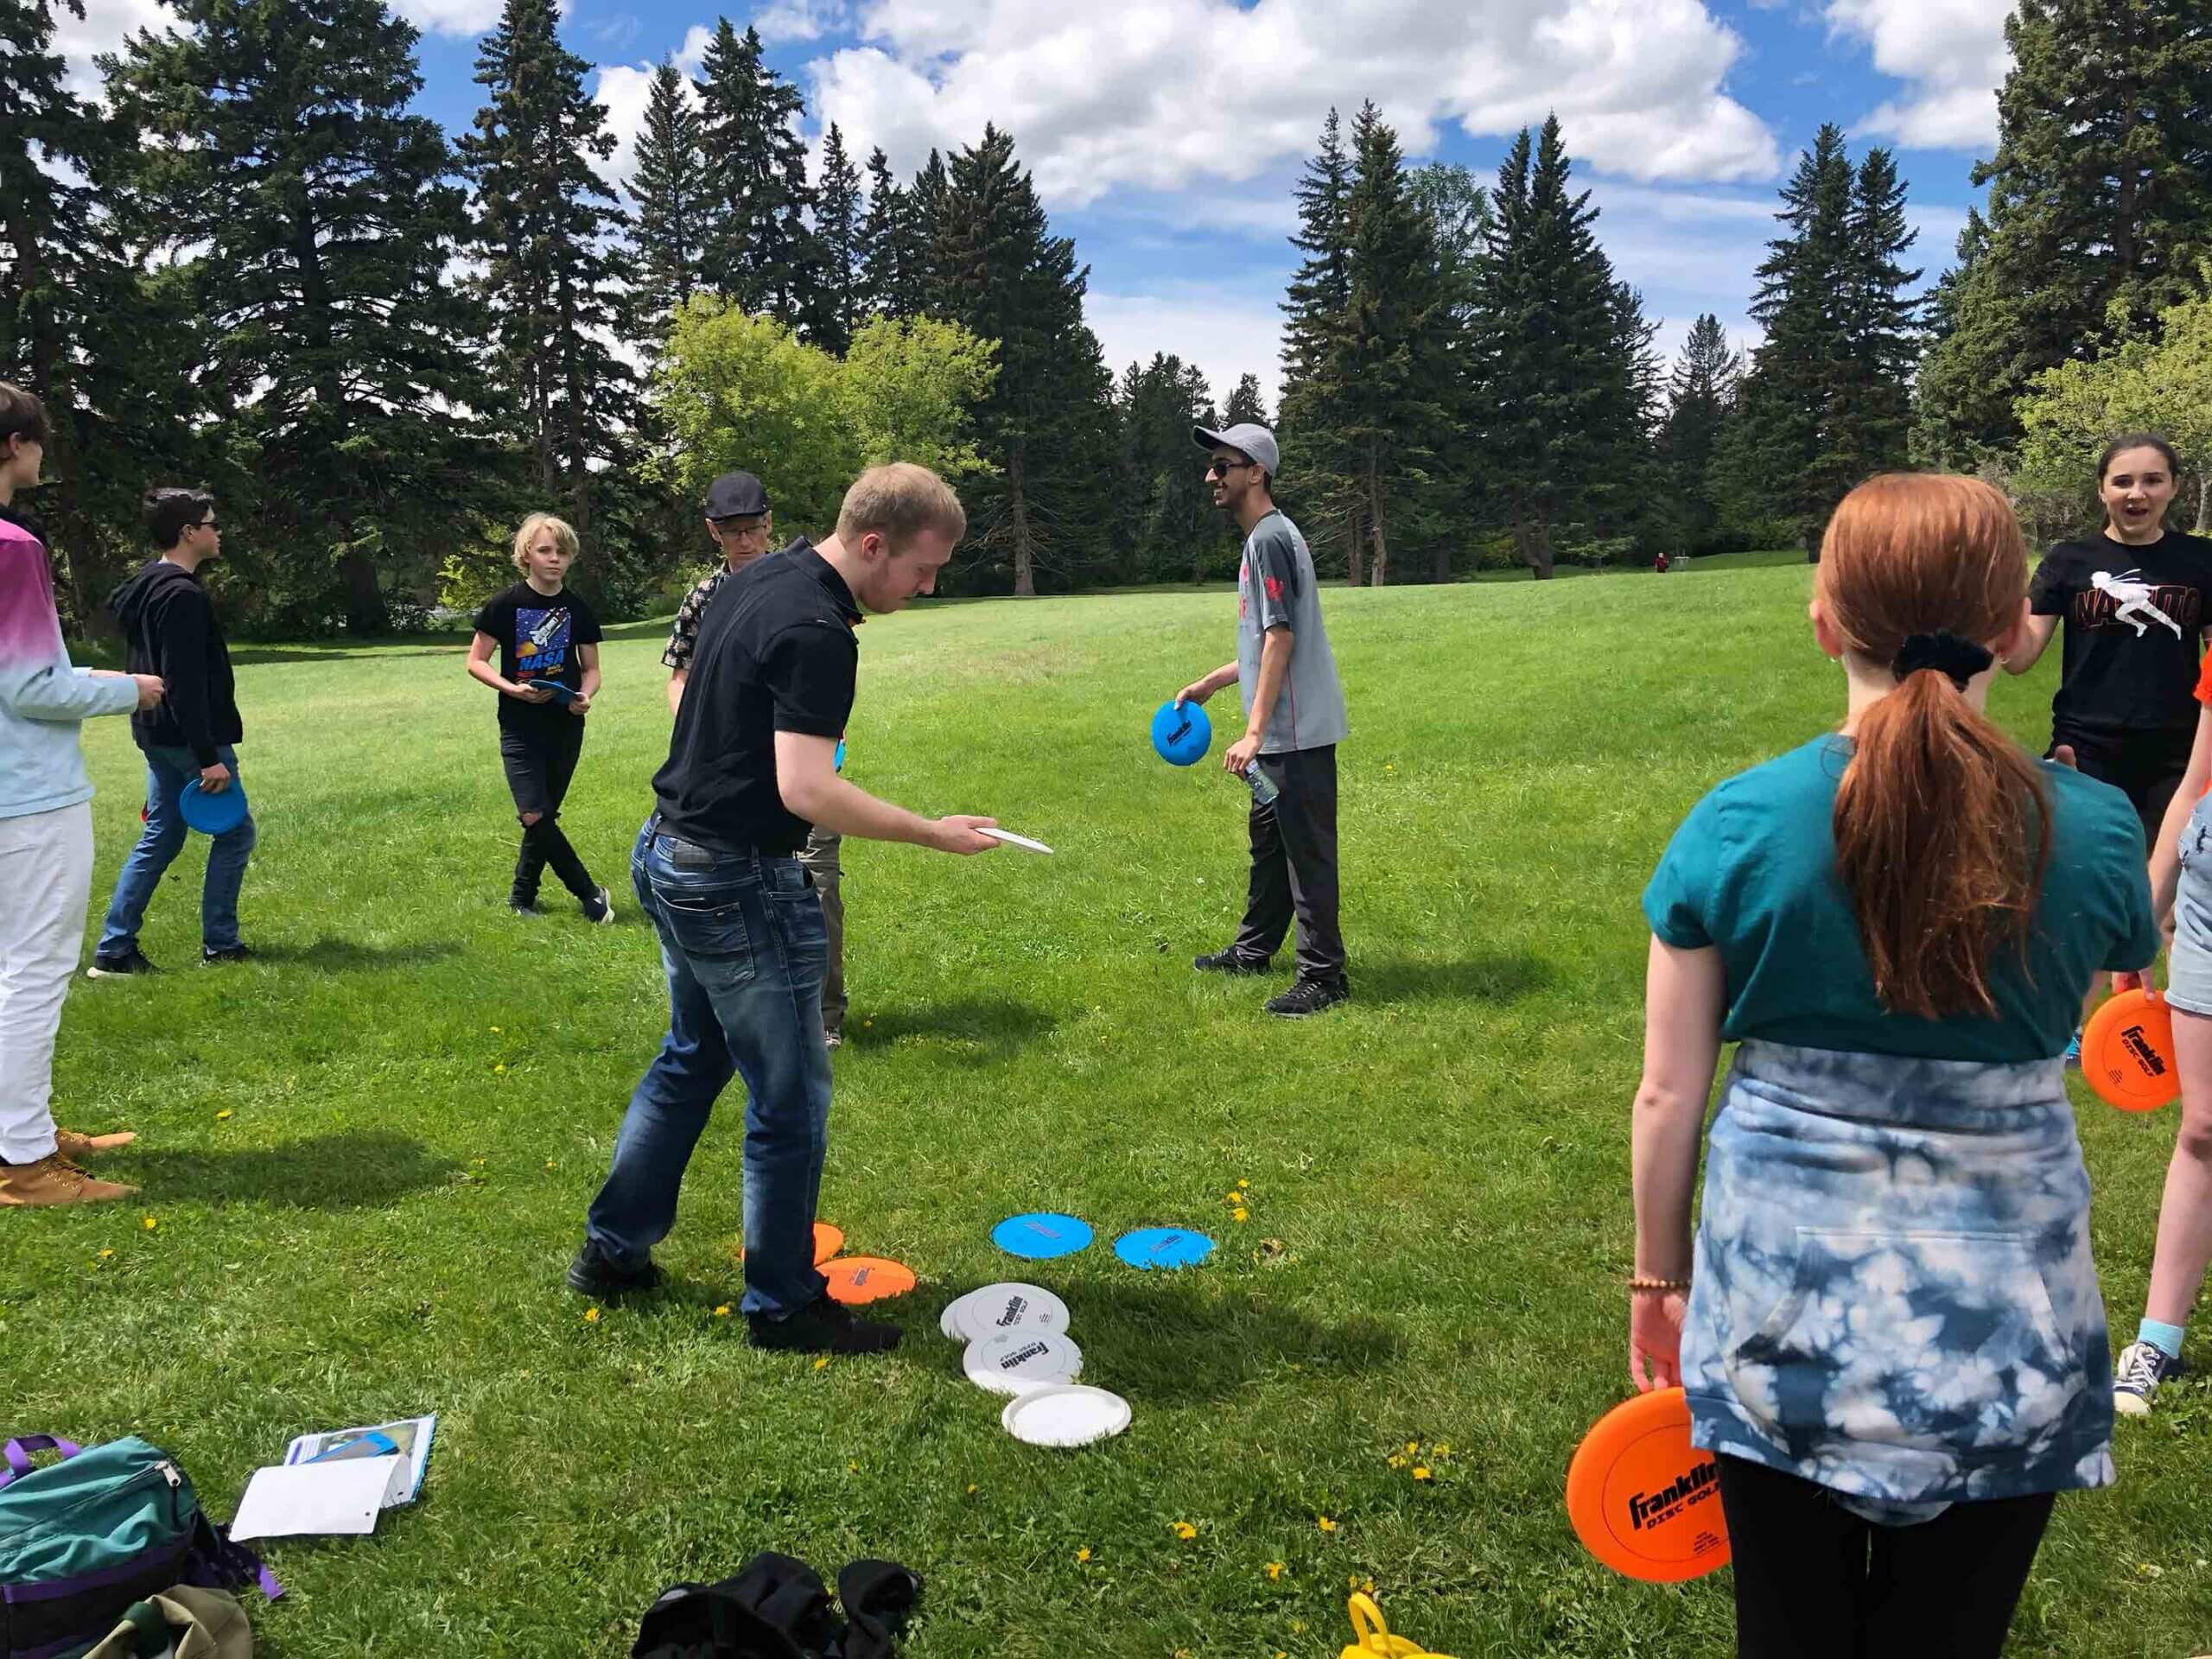 Highschool students play golf disc in a park in Calgary